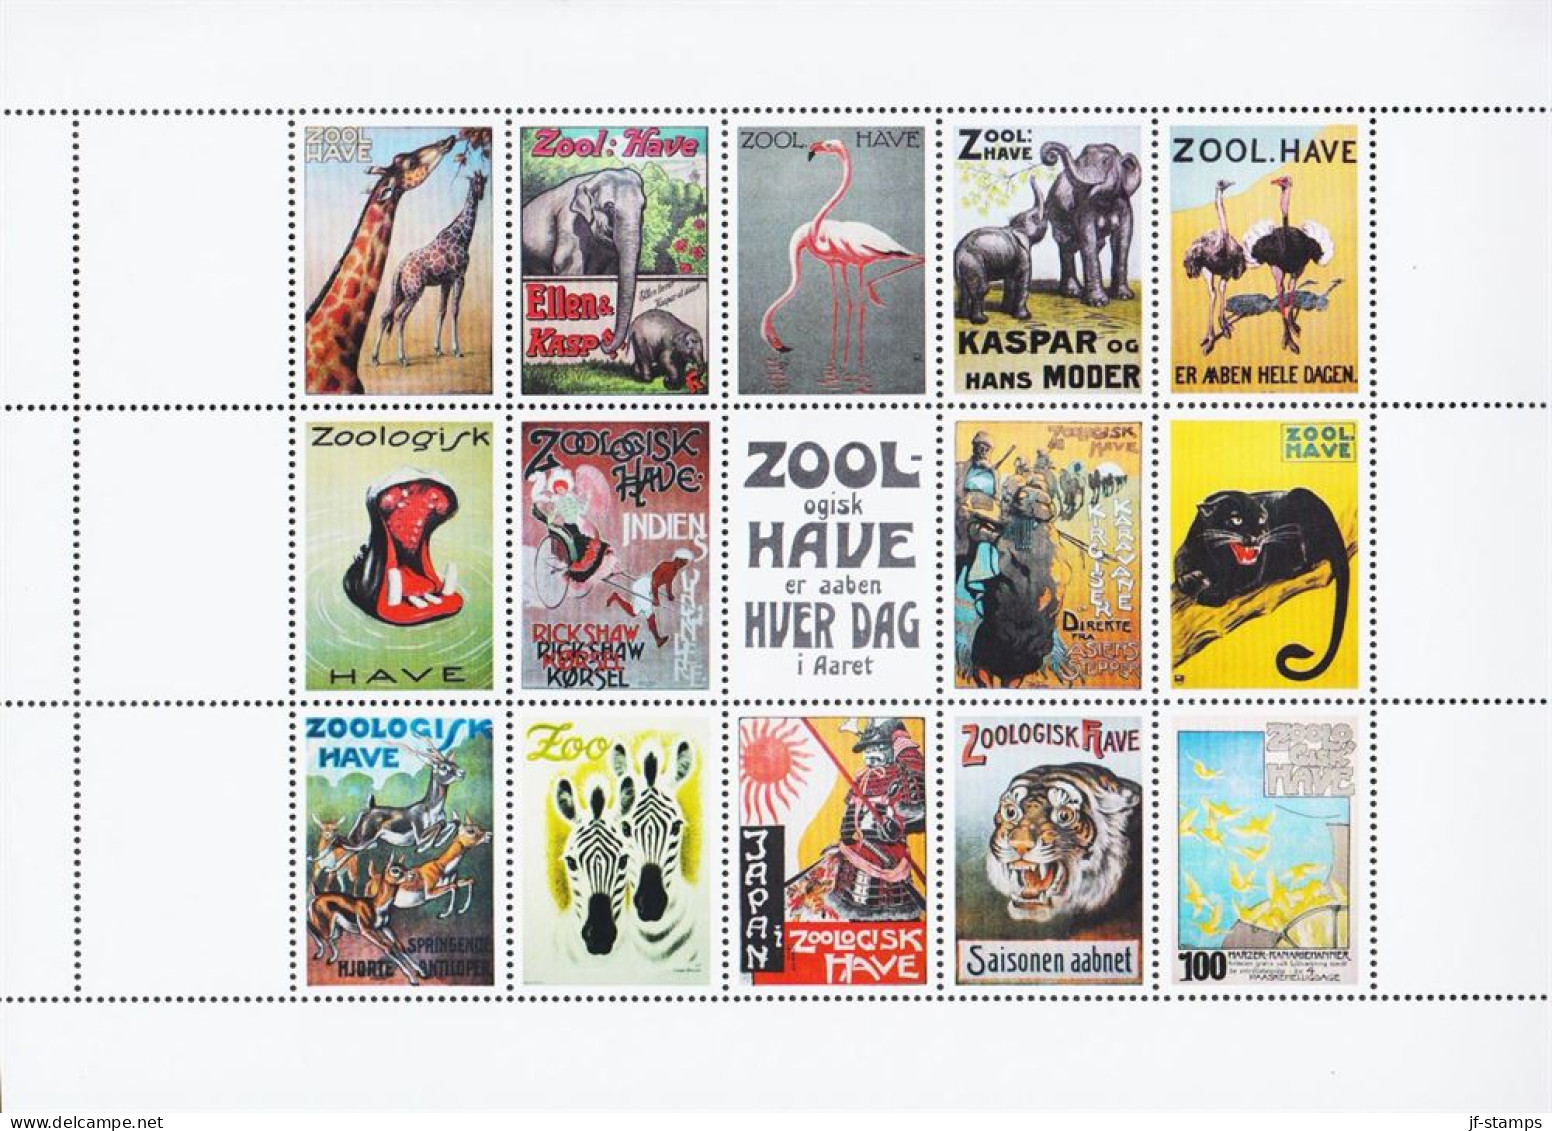 2009. DANMARK. ZOOLOGISK HAVE Sheet With A Selection Of 15 Posters In Stamp Size Never Hinged. Beautiful M... - JF544442 - Unused Stamps